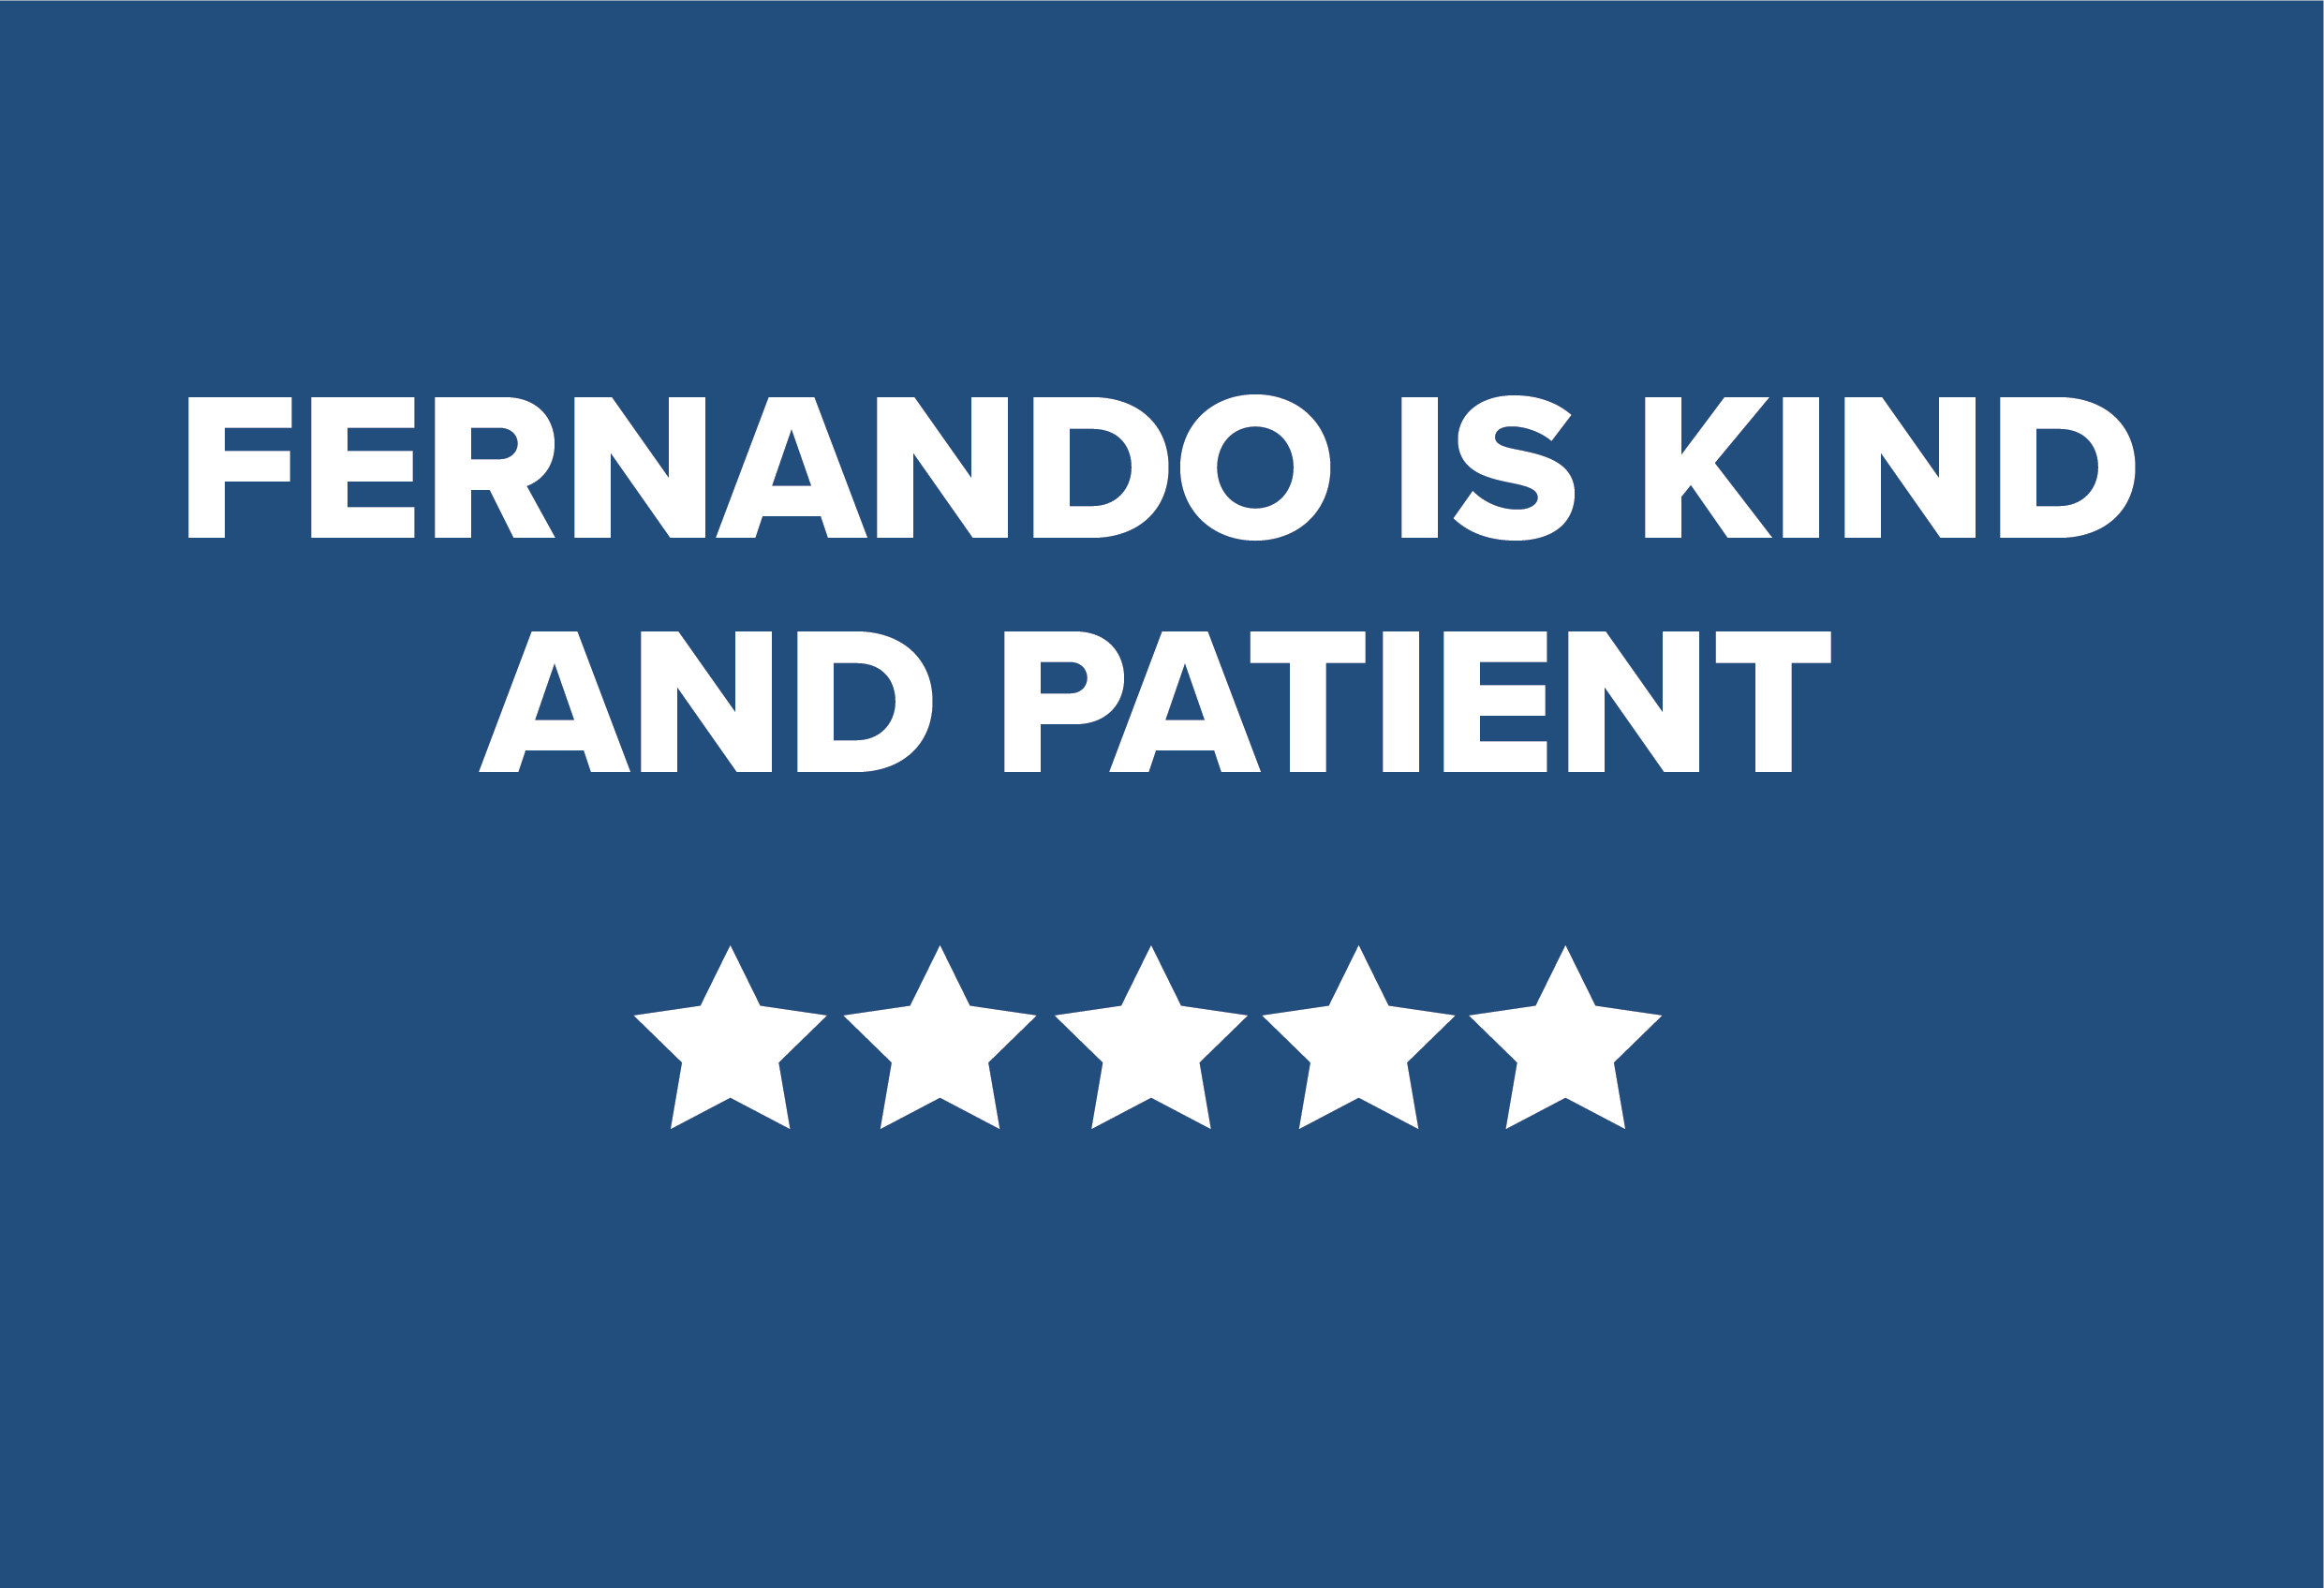 Fernando is kind and patient